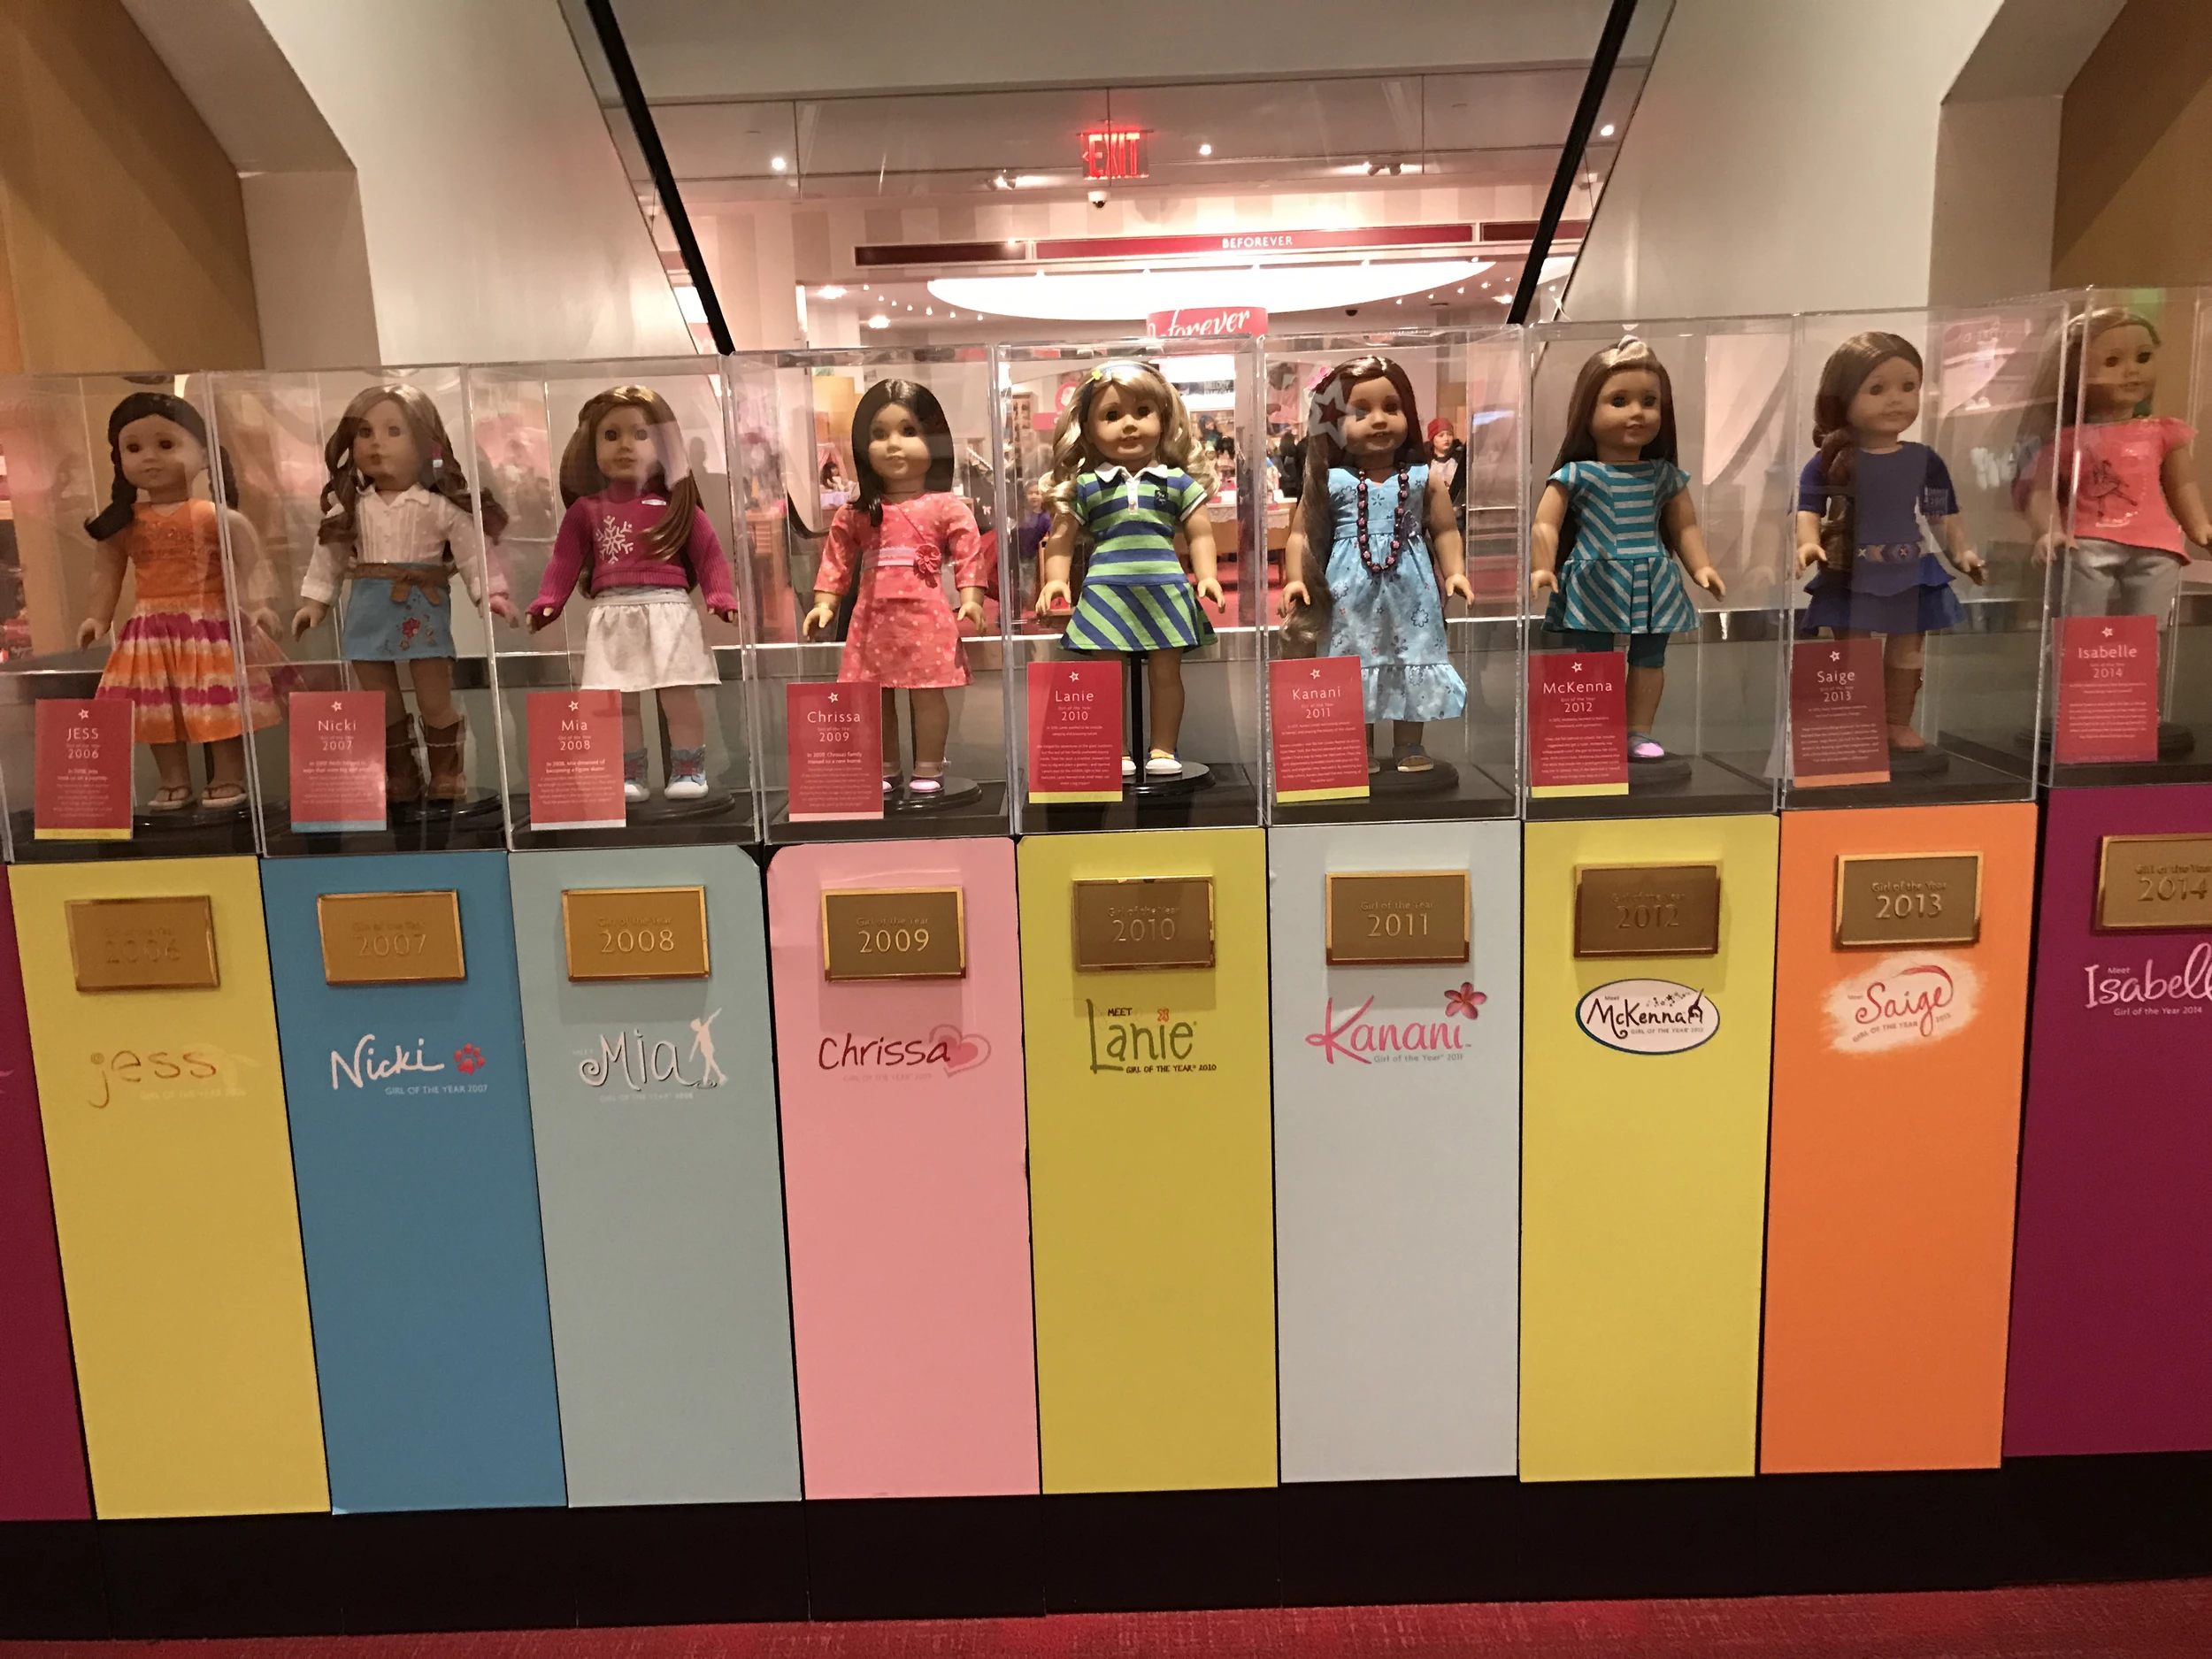 american girl place